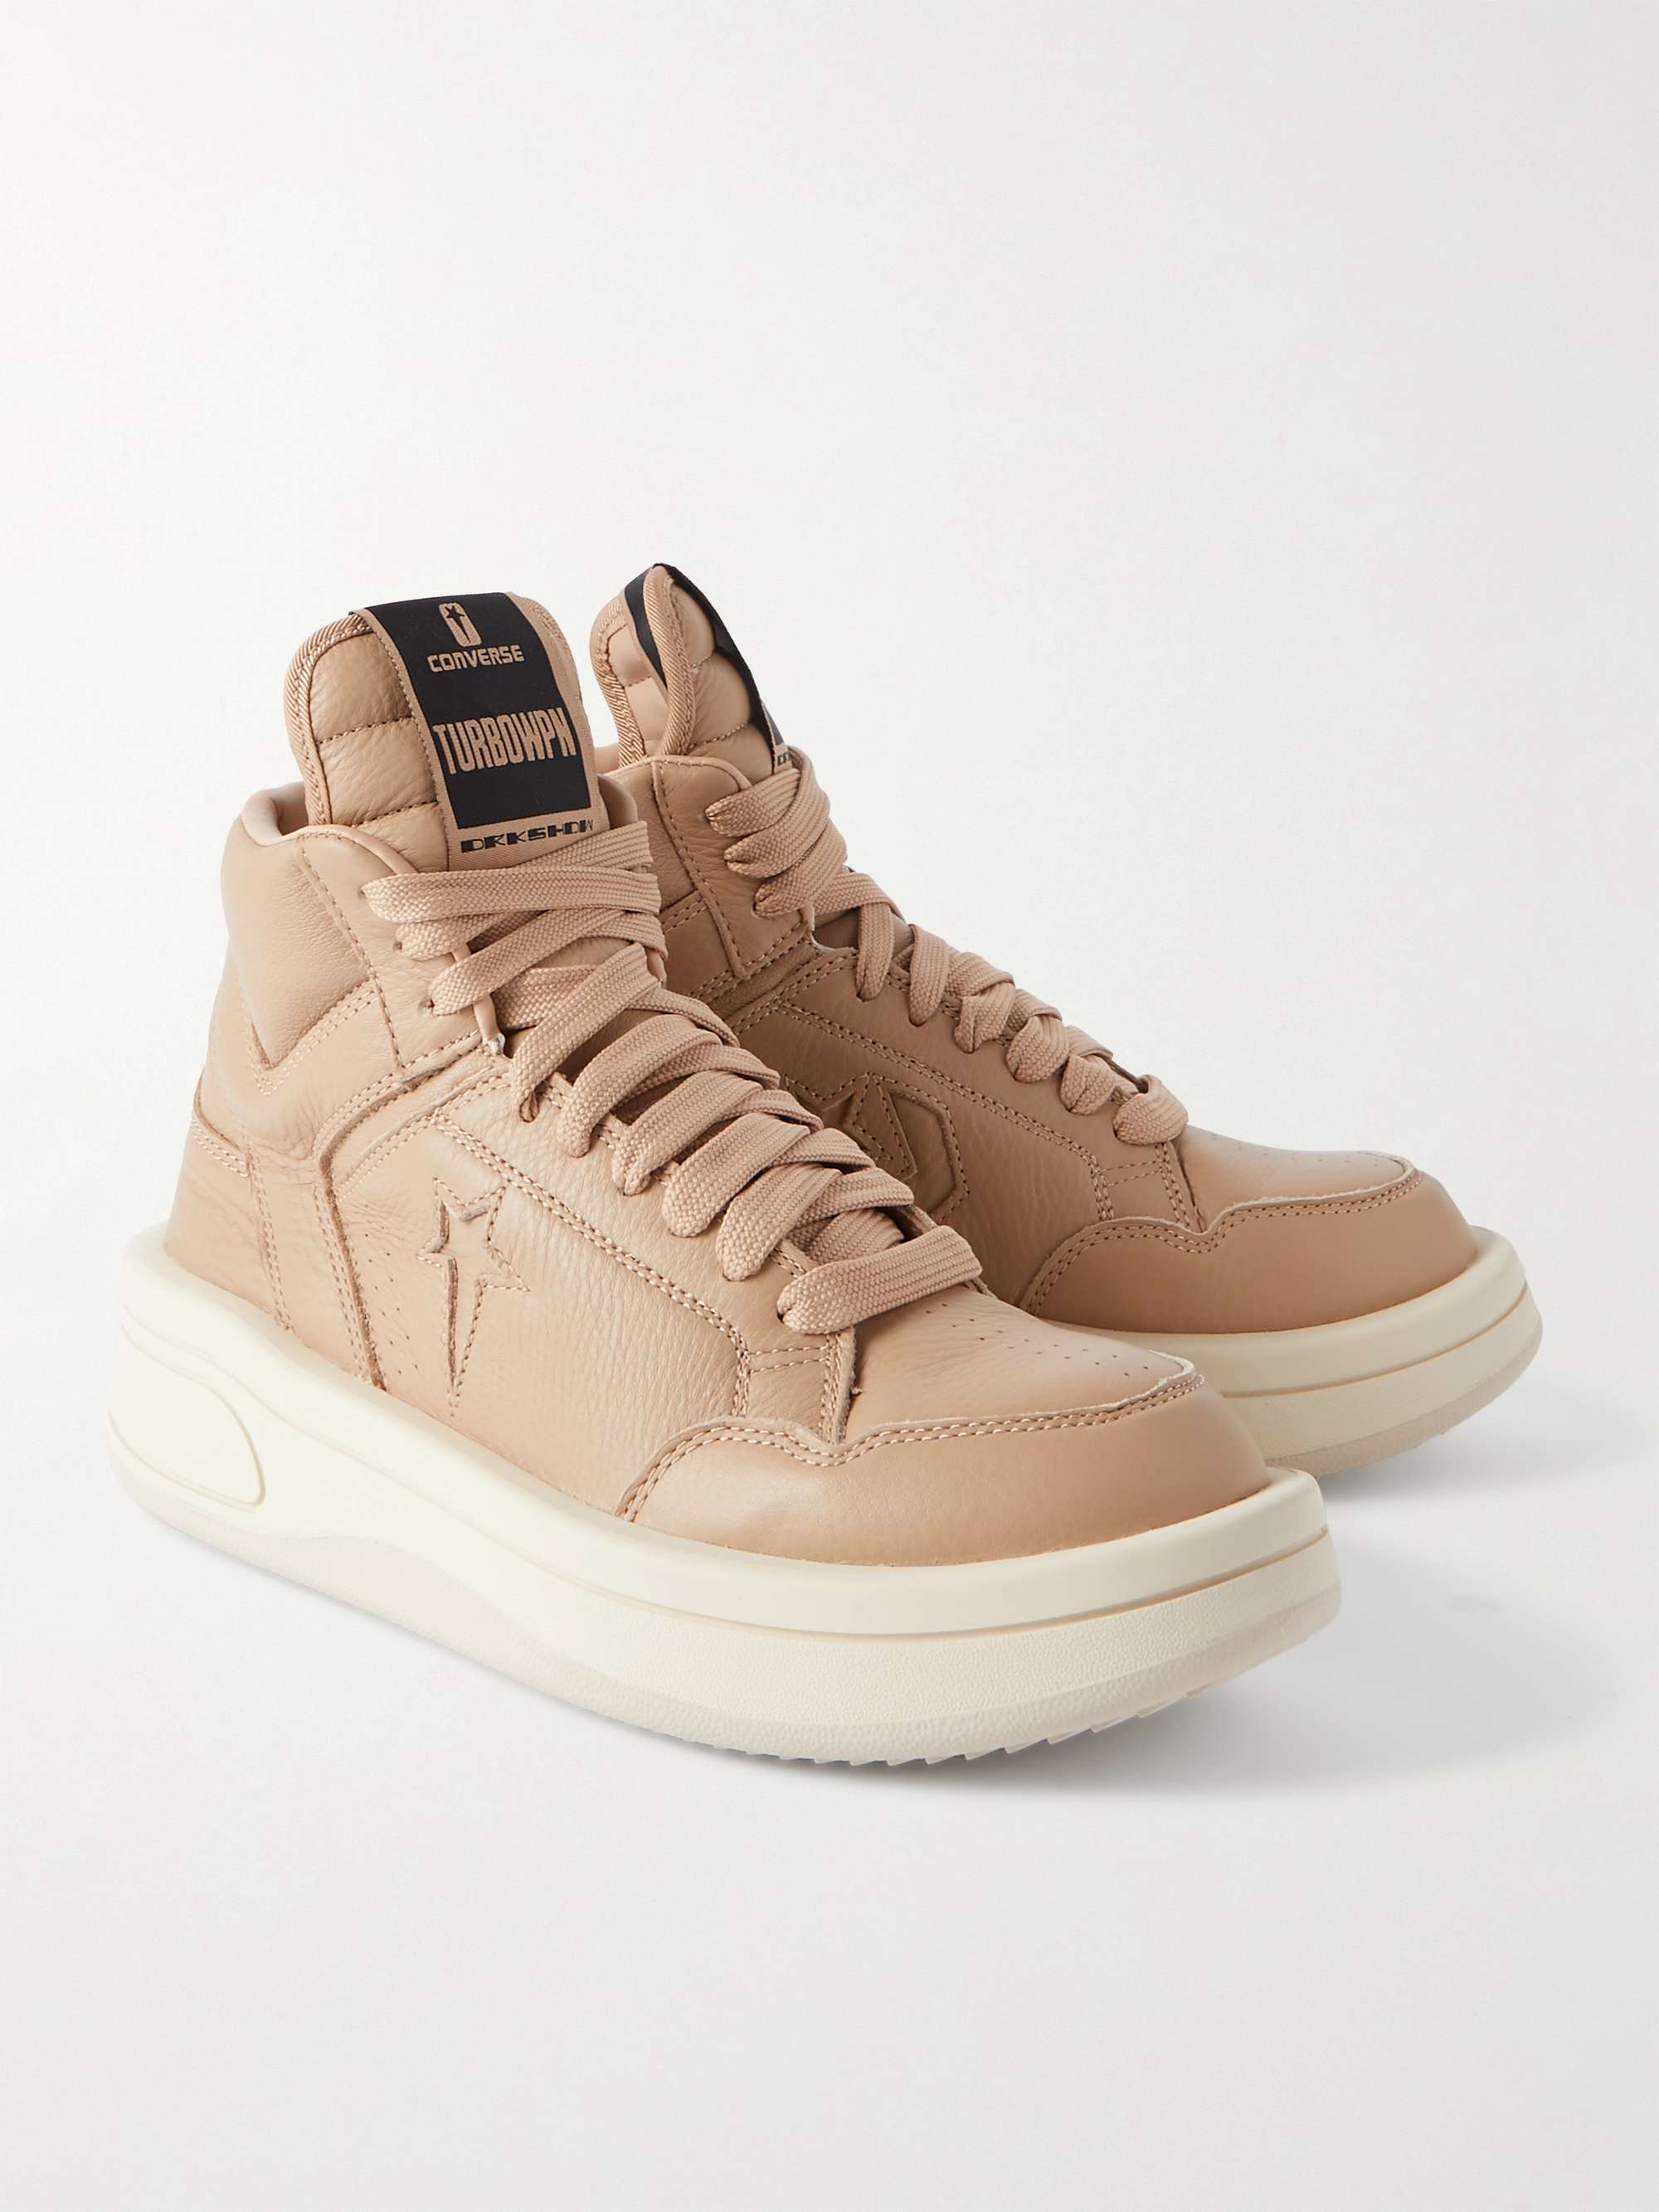 RICK OWENS + Converse TURBOWPN Full-Grain Leather High-Top Sneakers for ...